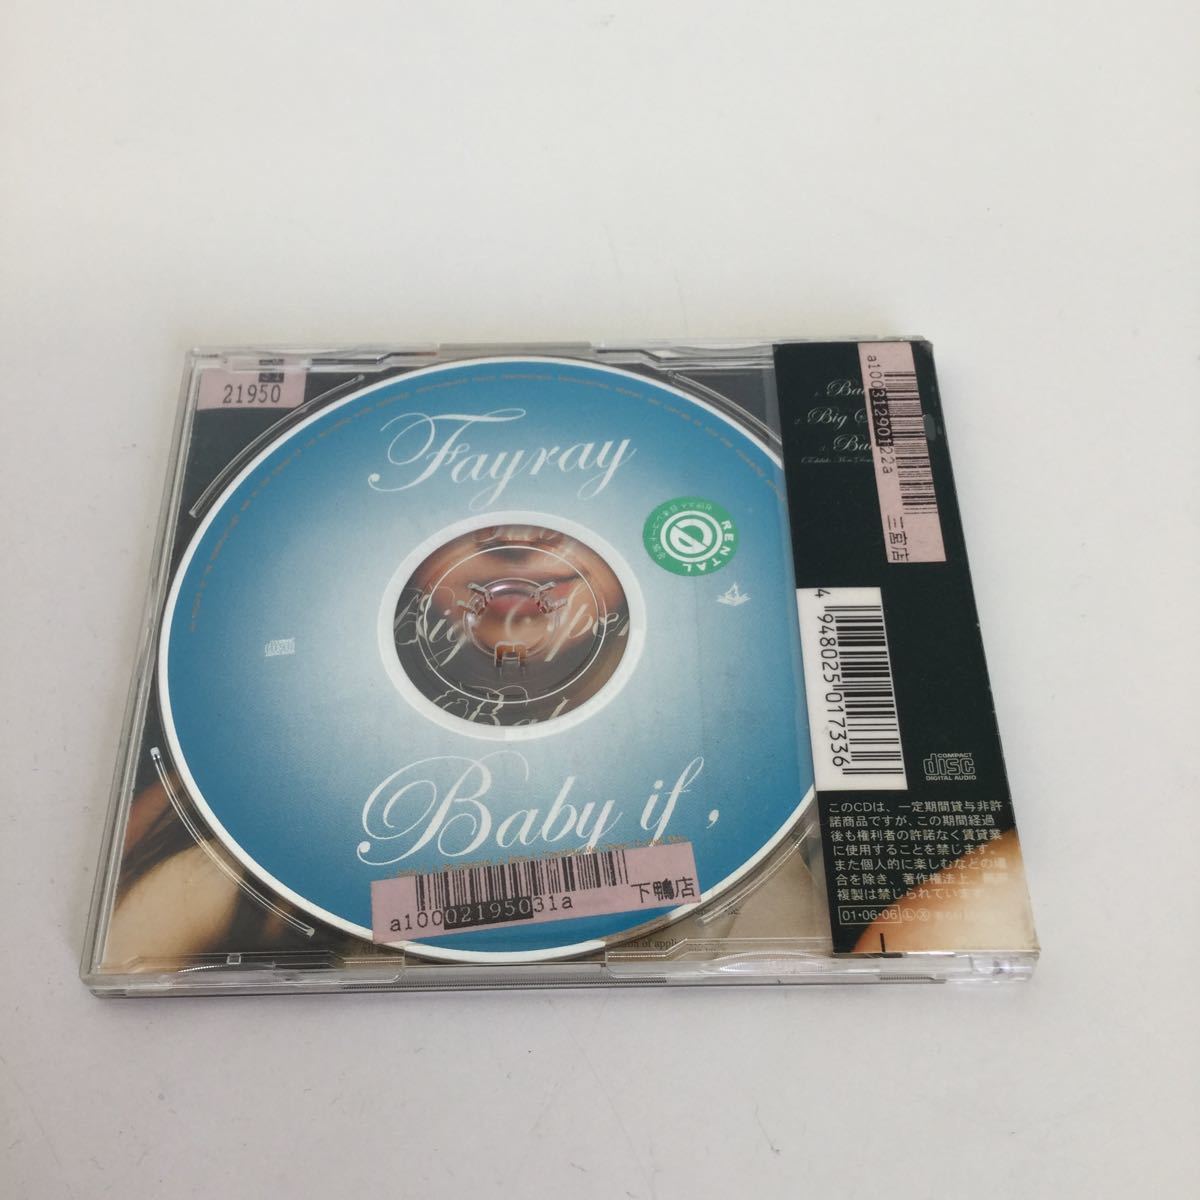 [ secondhand goods ] single CD Fayray Baby if, ARCJ 173